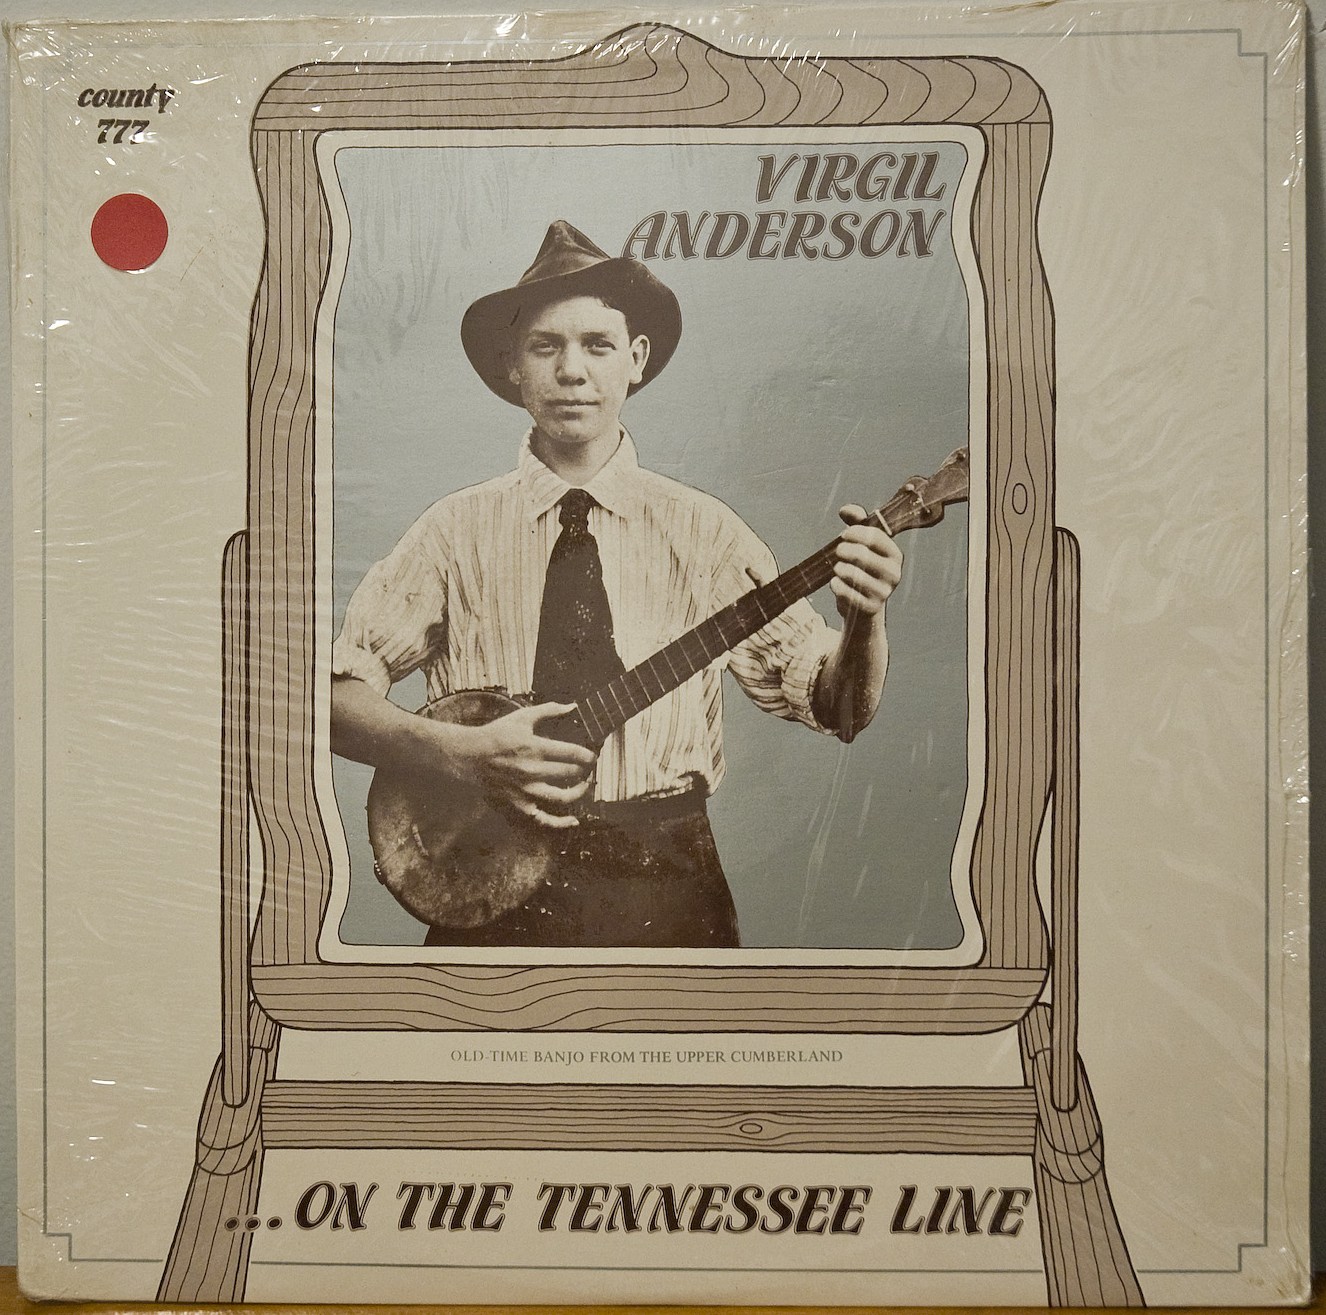 Virgil Anderson - On the Tennessee Line photo by E. Gomez